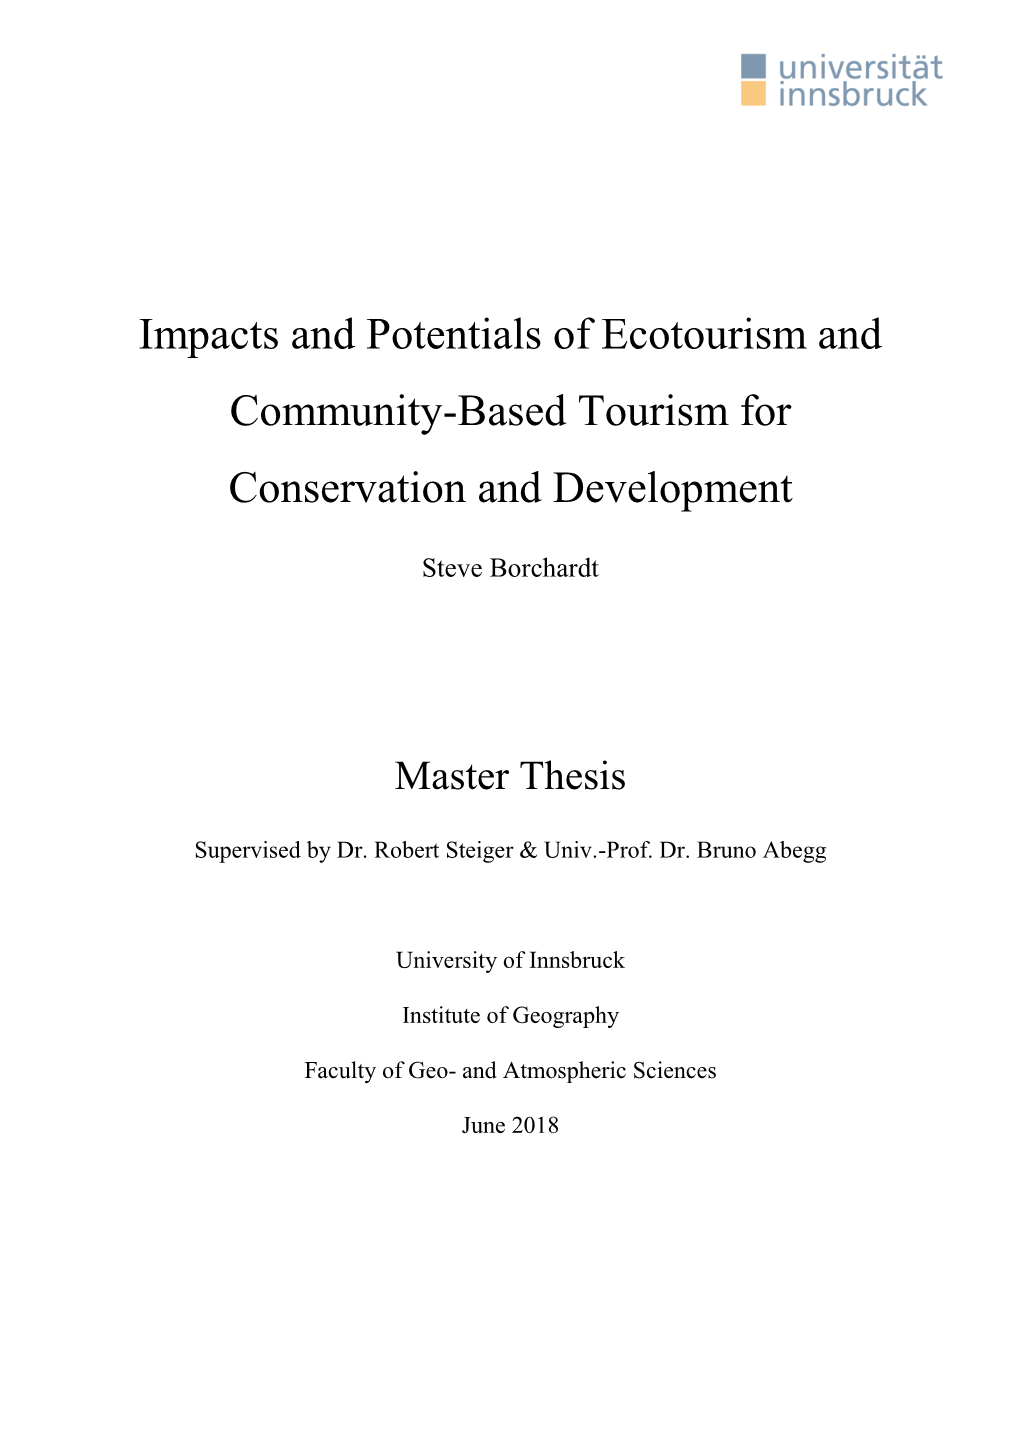 Impacts and Potentials of Ecotourism and Community-Based Tourism for Conservation and Development